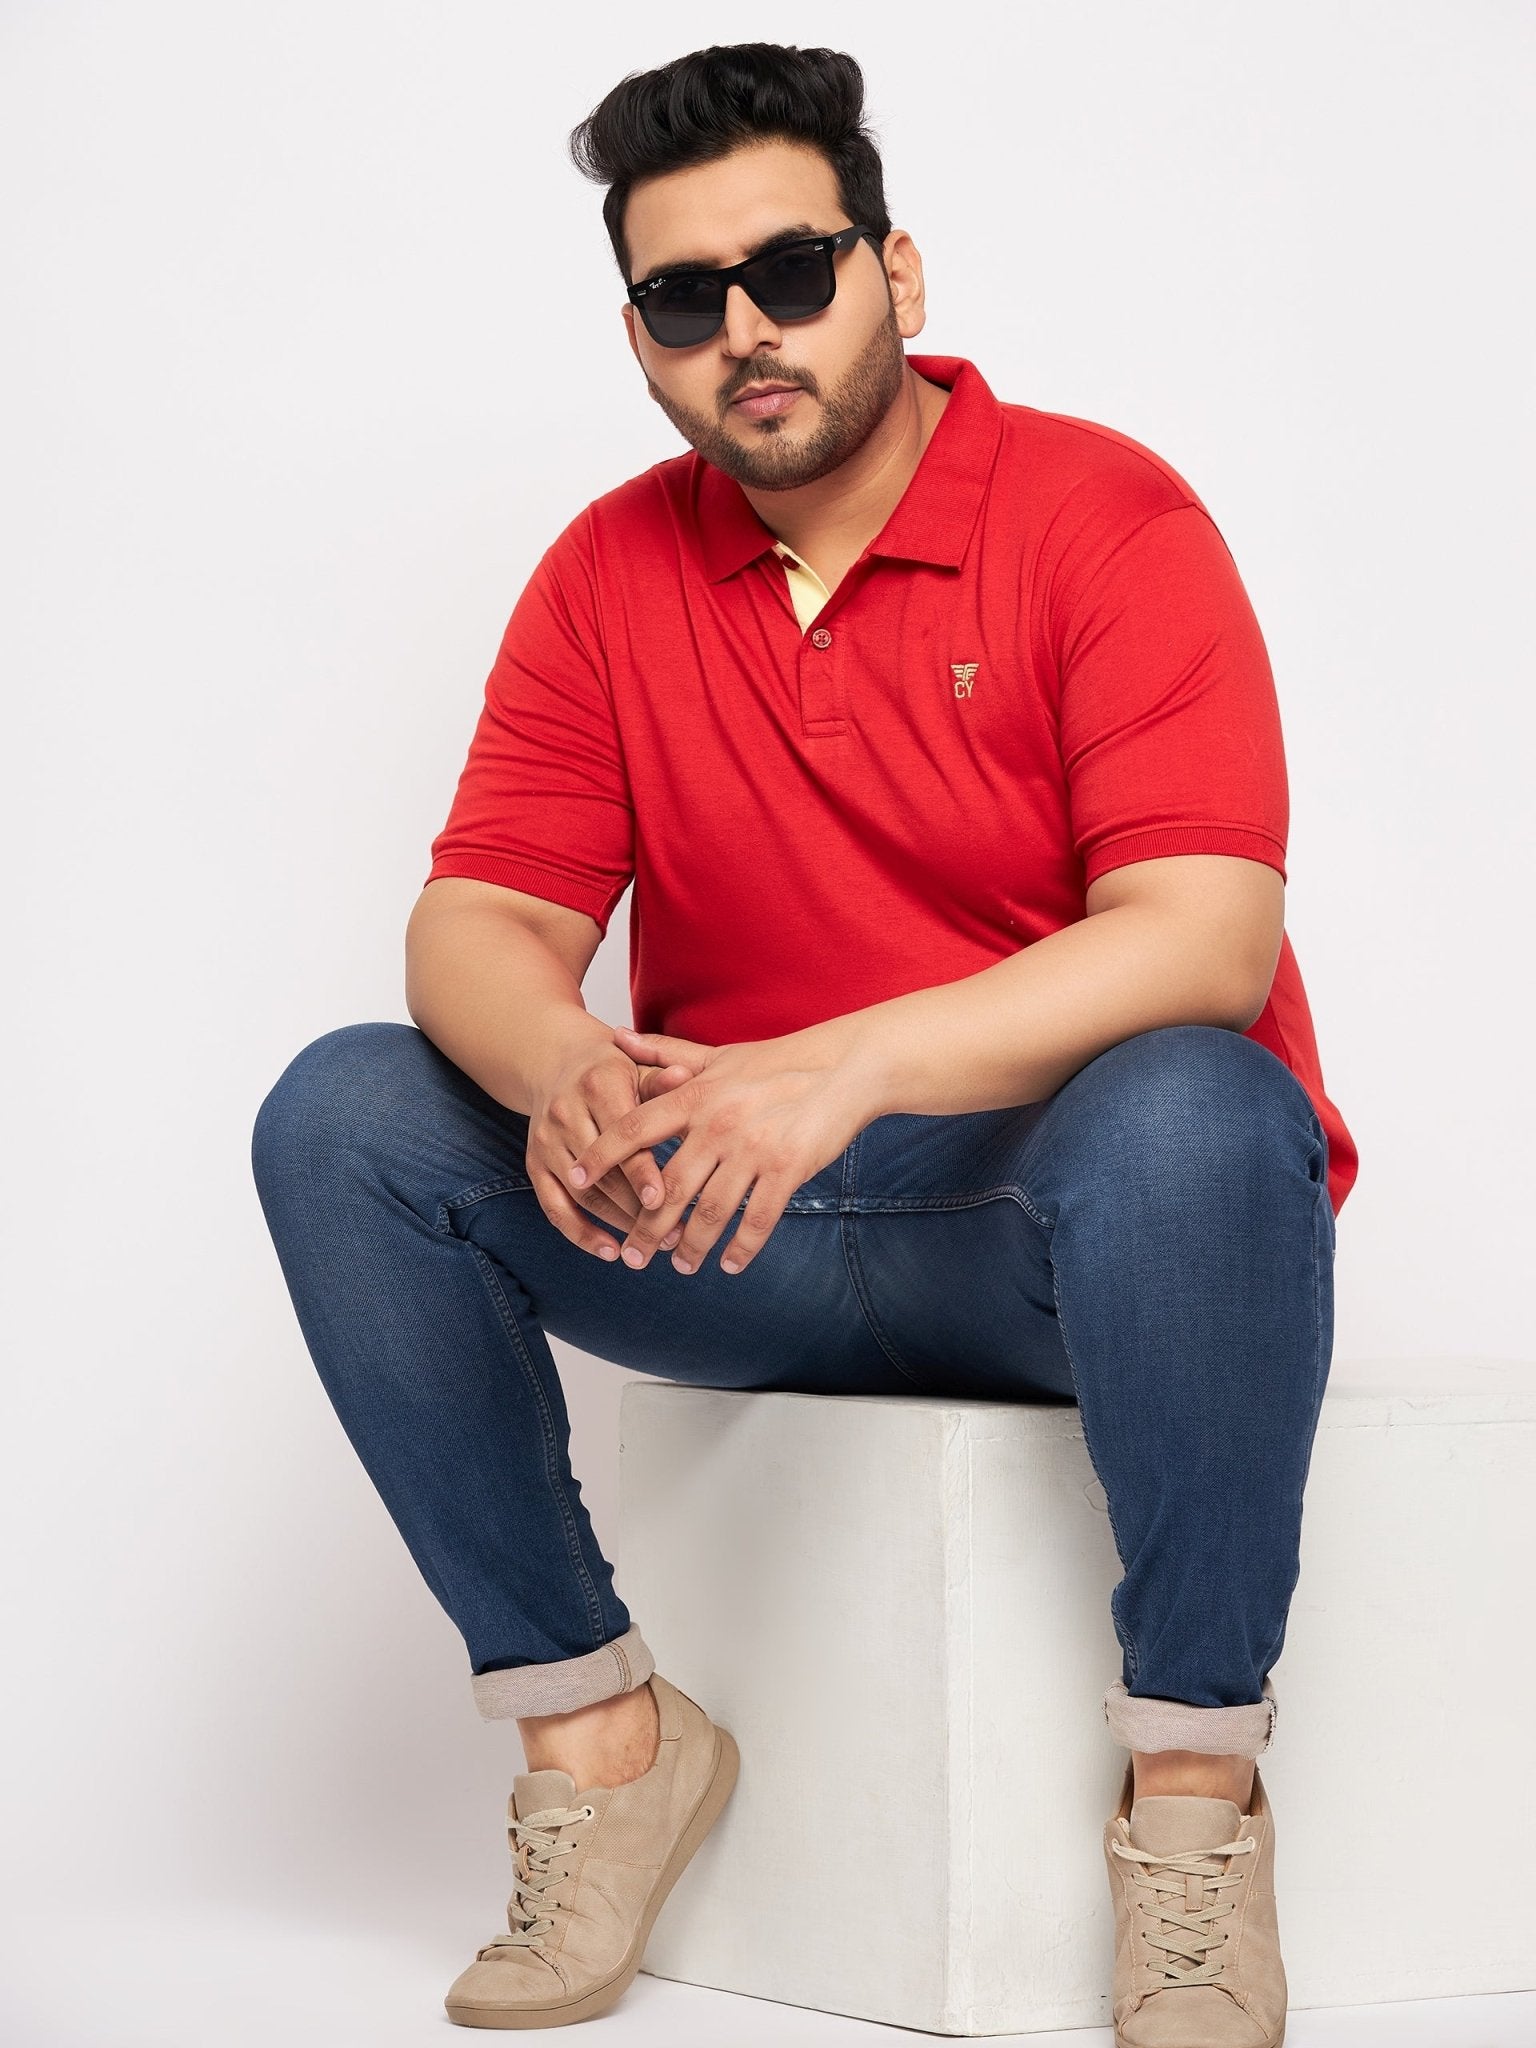 Plus Size Red Polo T-Shirt - clubyork